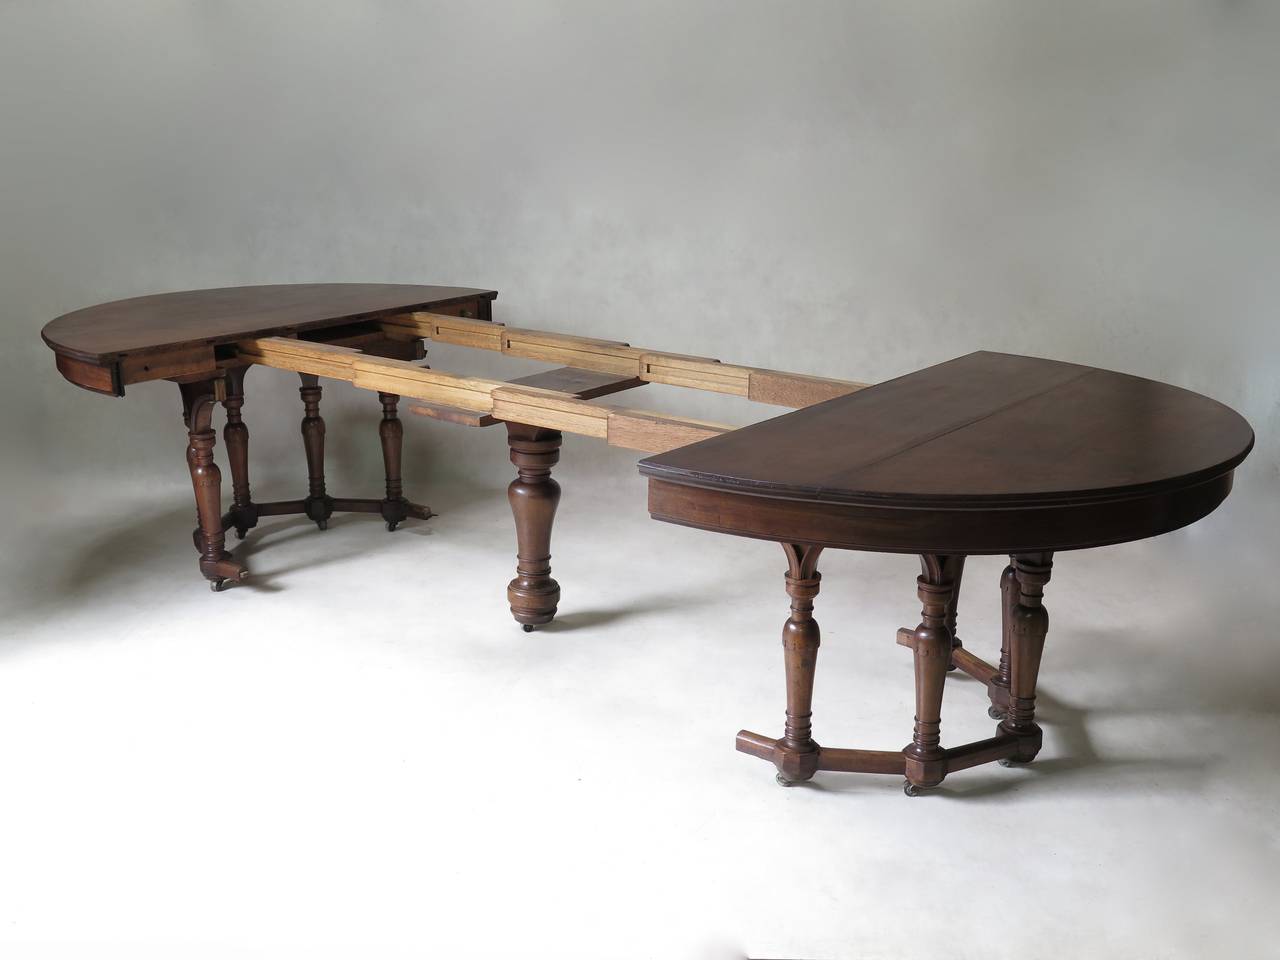 Rare and unusual oval dining table in solid walnut. Graceful turned and tapering carved legs, joined at the top by arches and at the bottom by a stretcher. Larger central baluster leg. The table is raised on casters.

The dining table comes with